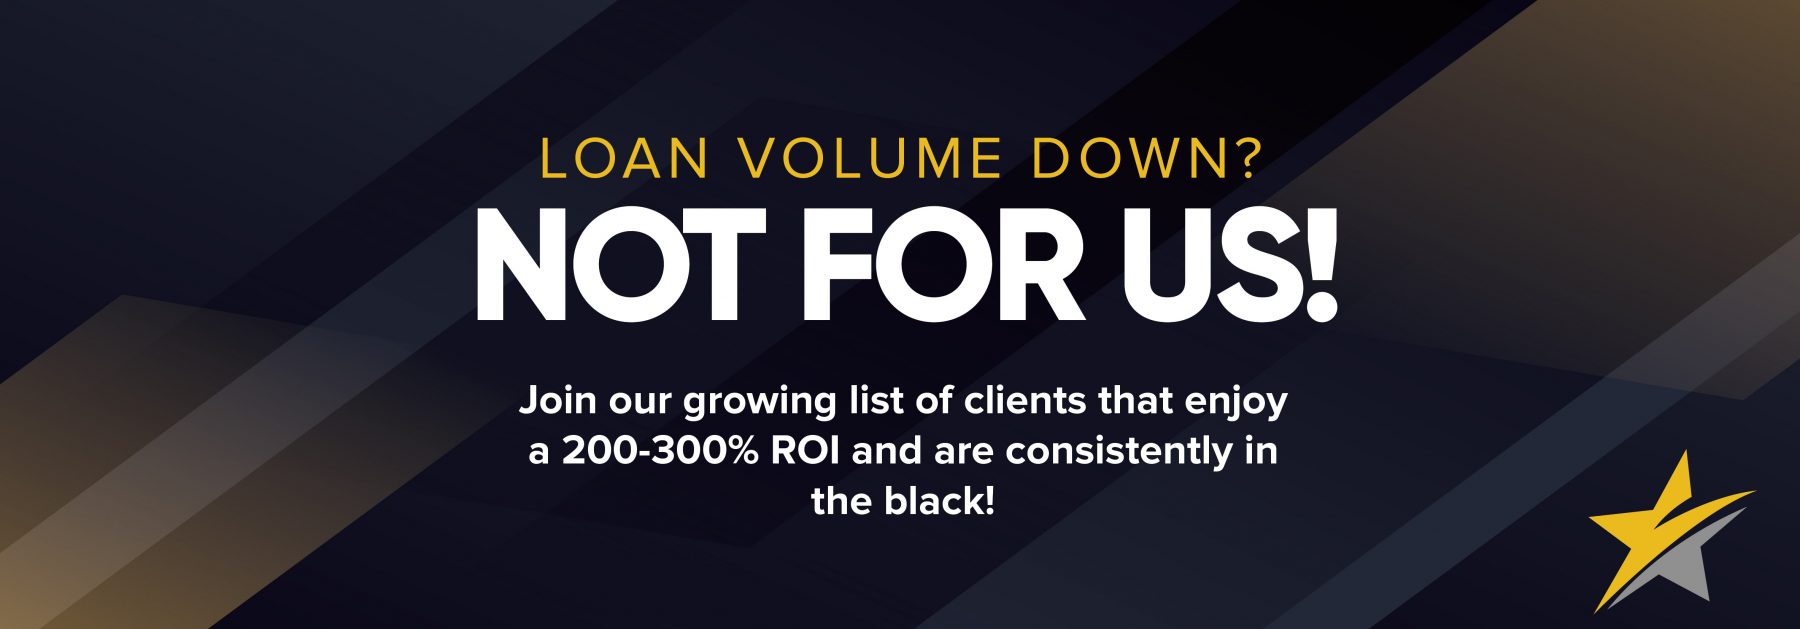 Loan Volume Down? Not for Us!